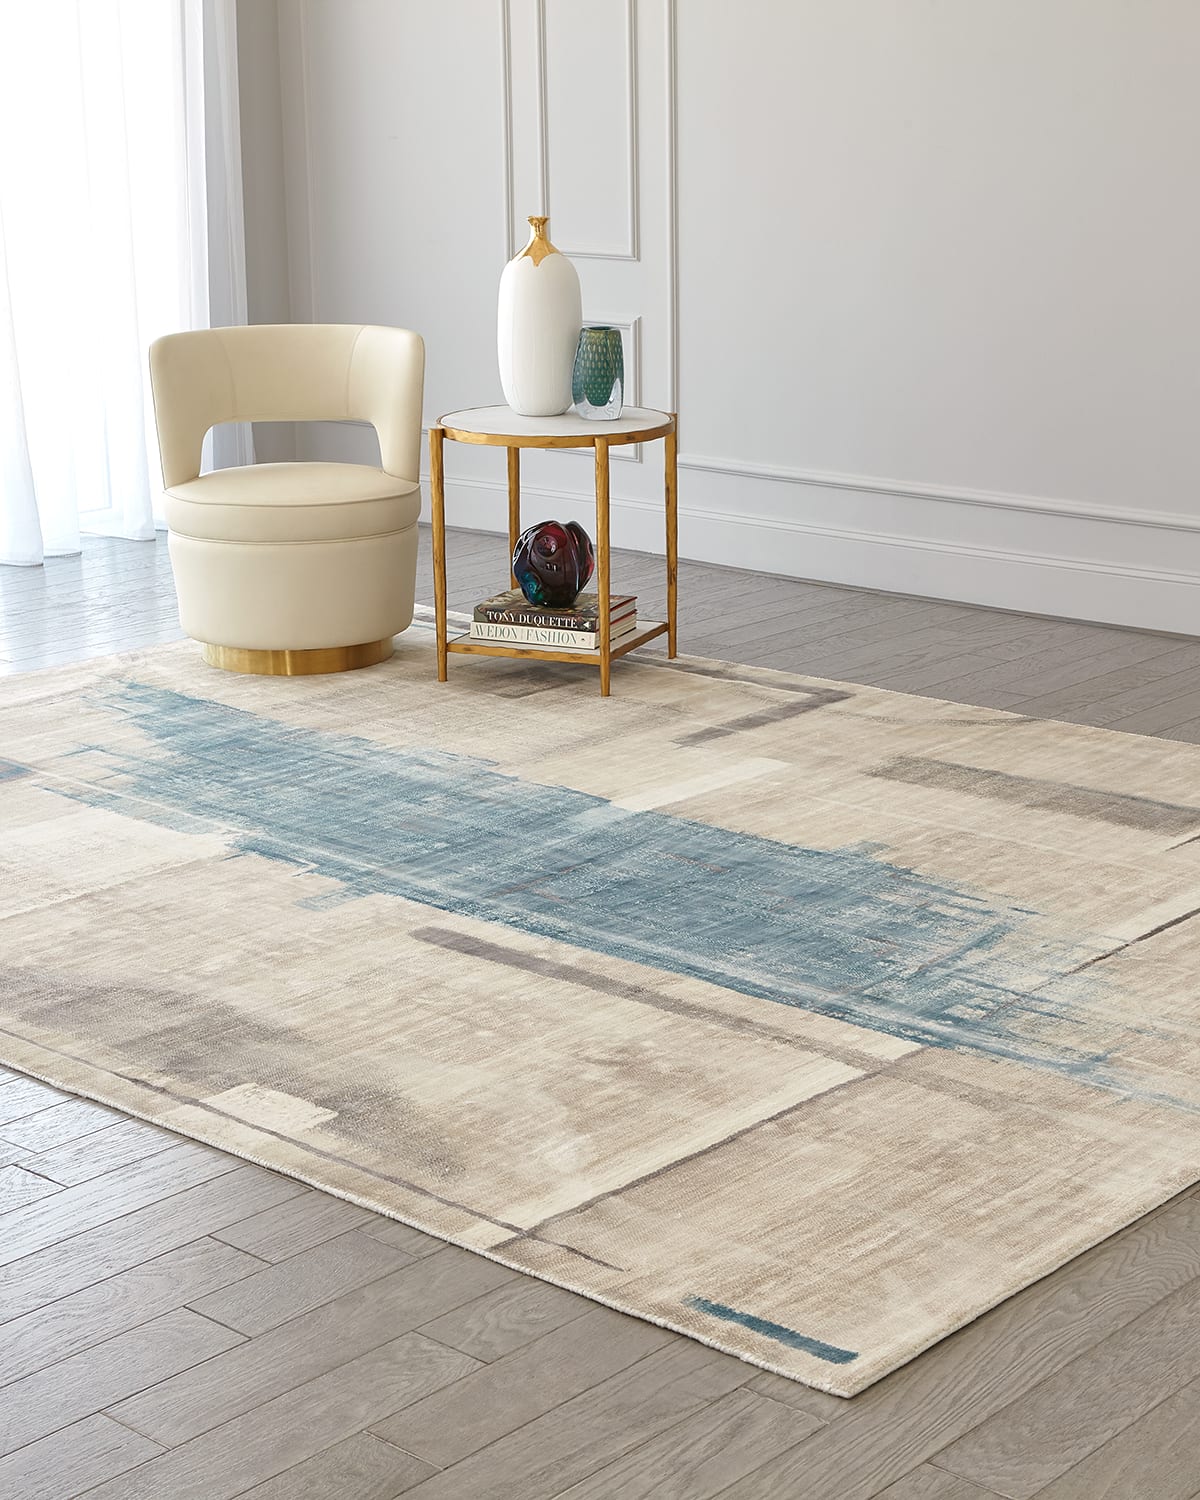 George Sellers For Global Views Art Hand-woven Rug, 9' X 12' In Blue